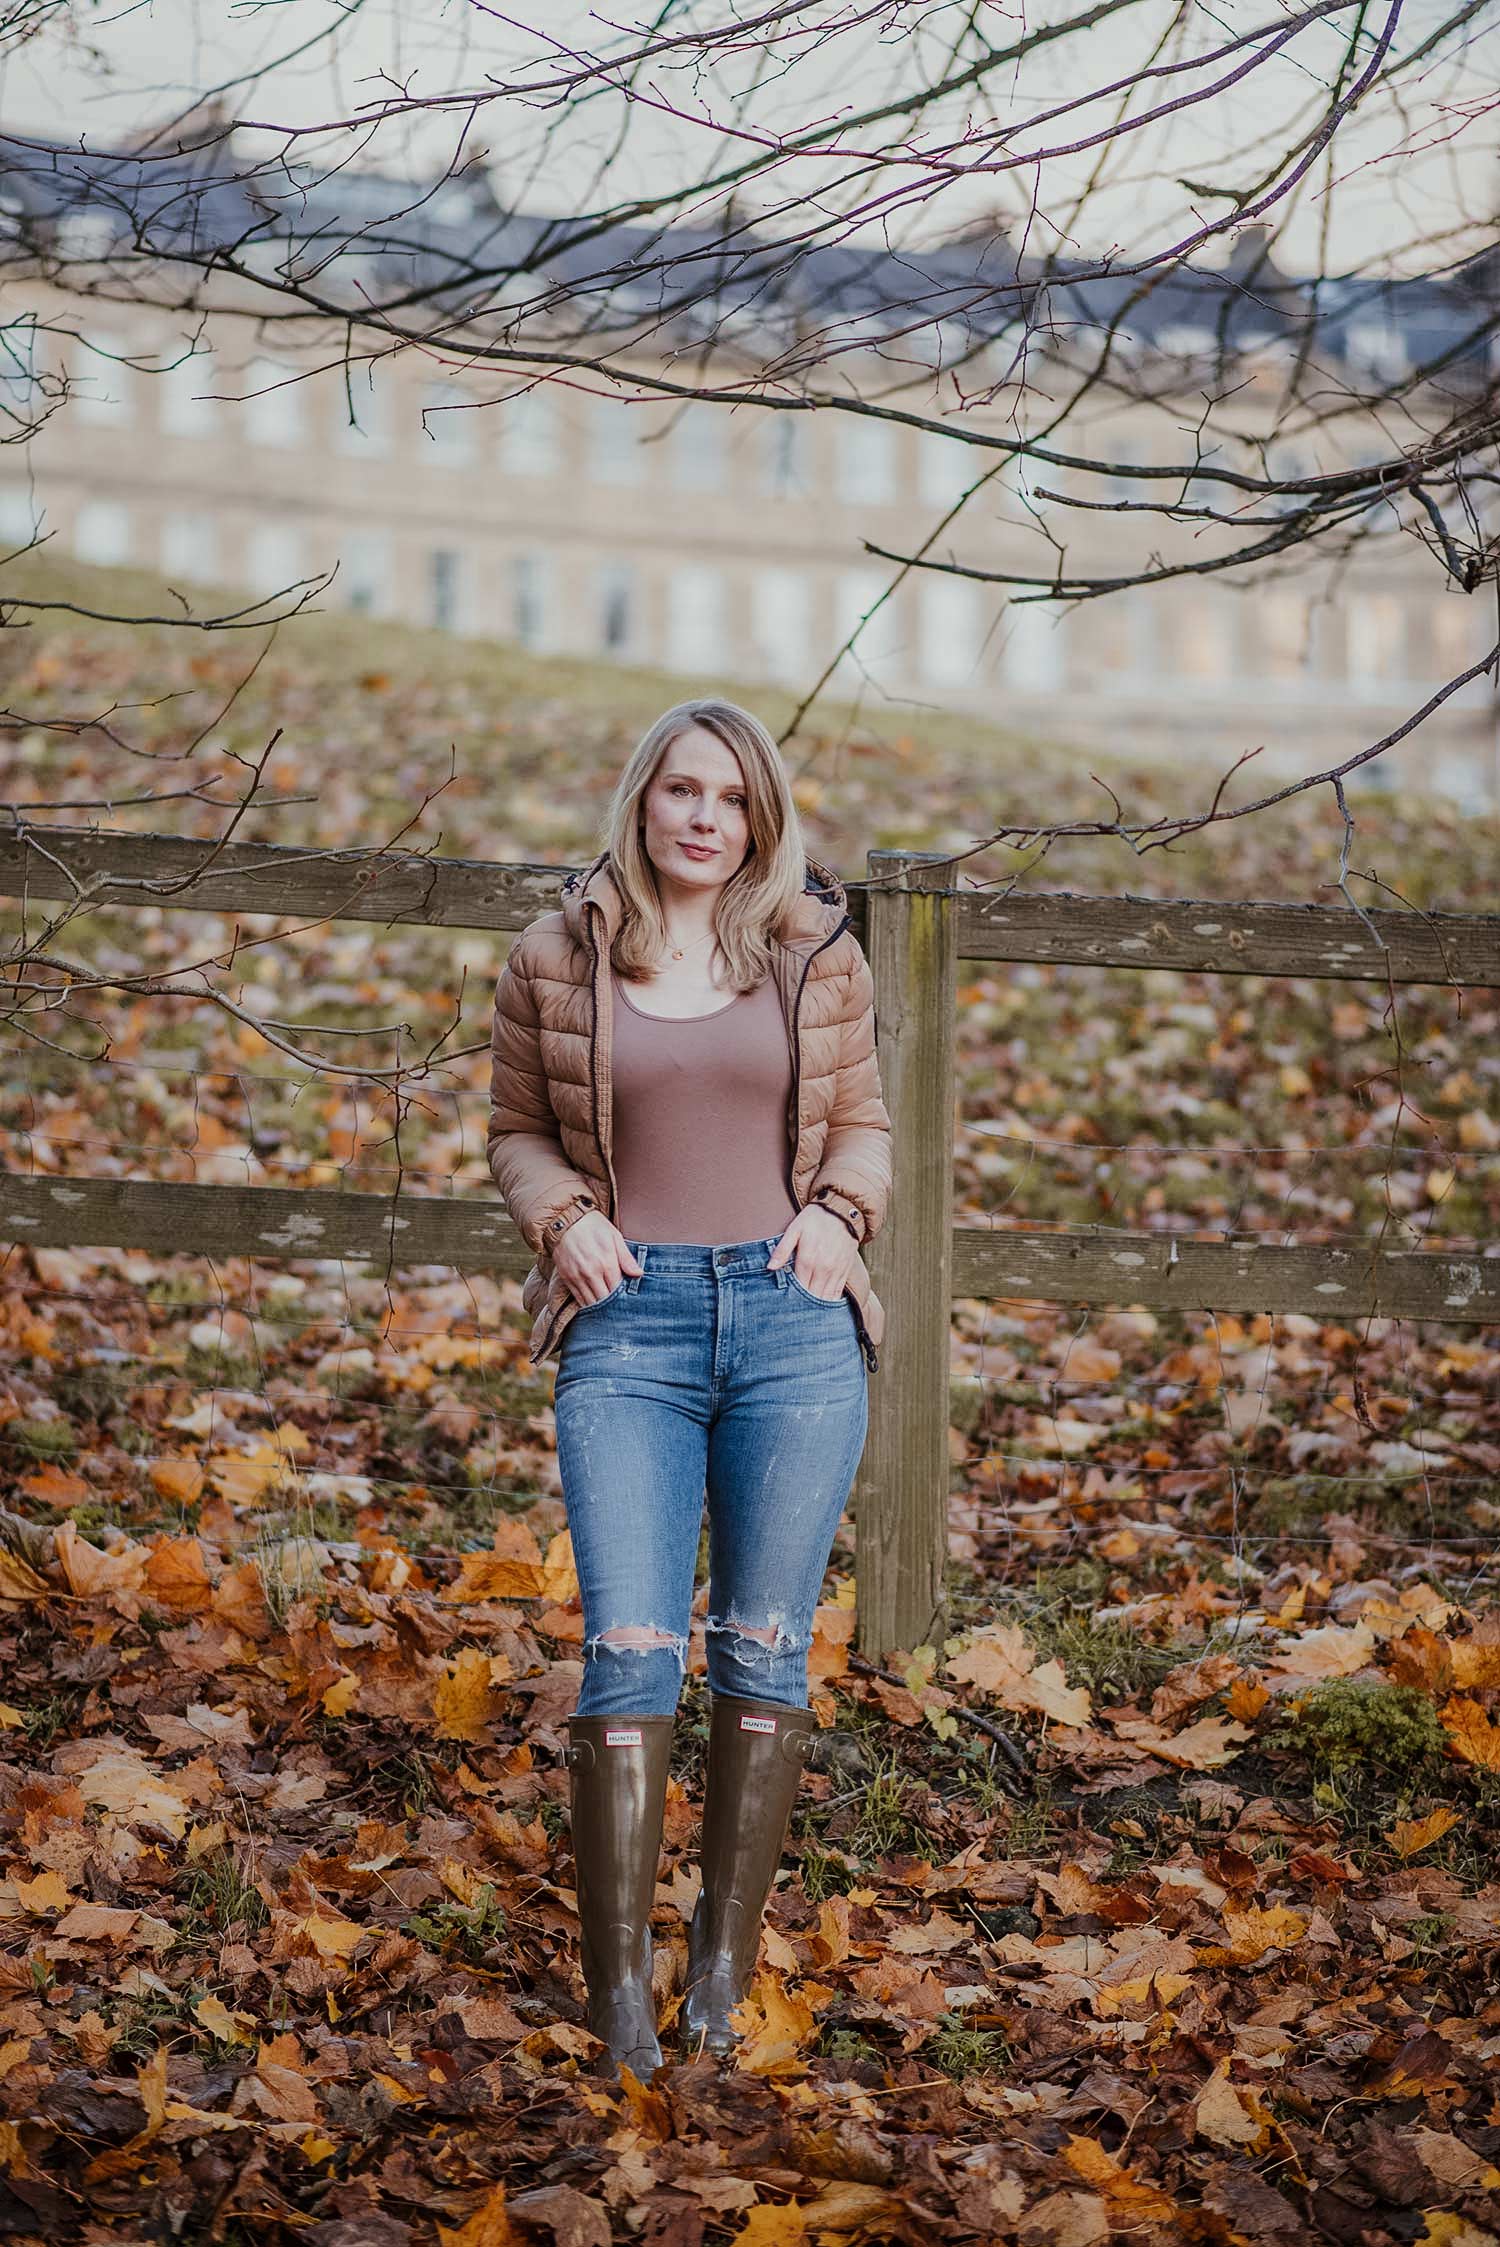 A Country Girl Outfit With Wellies – FORD LA FEMME